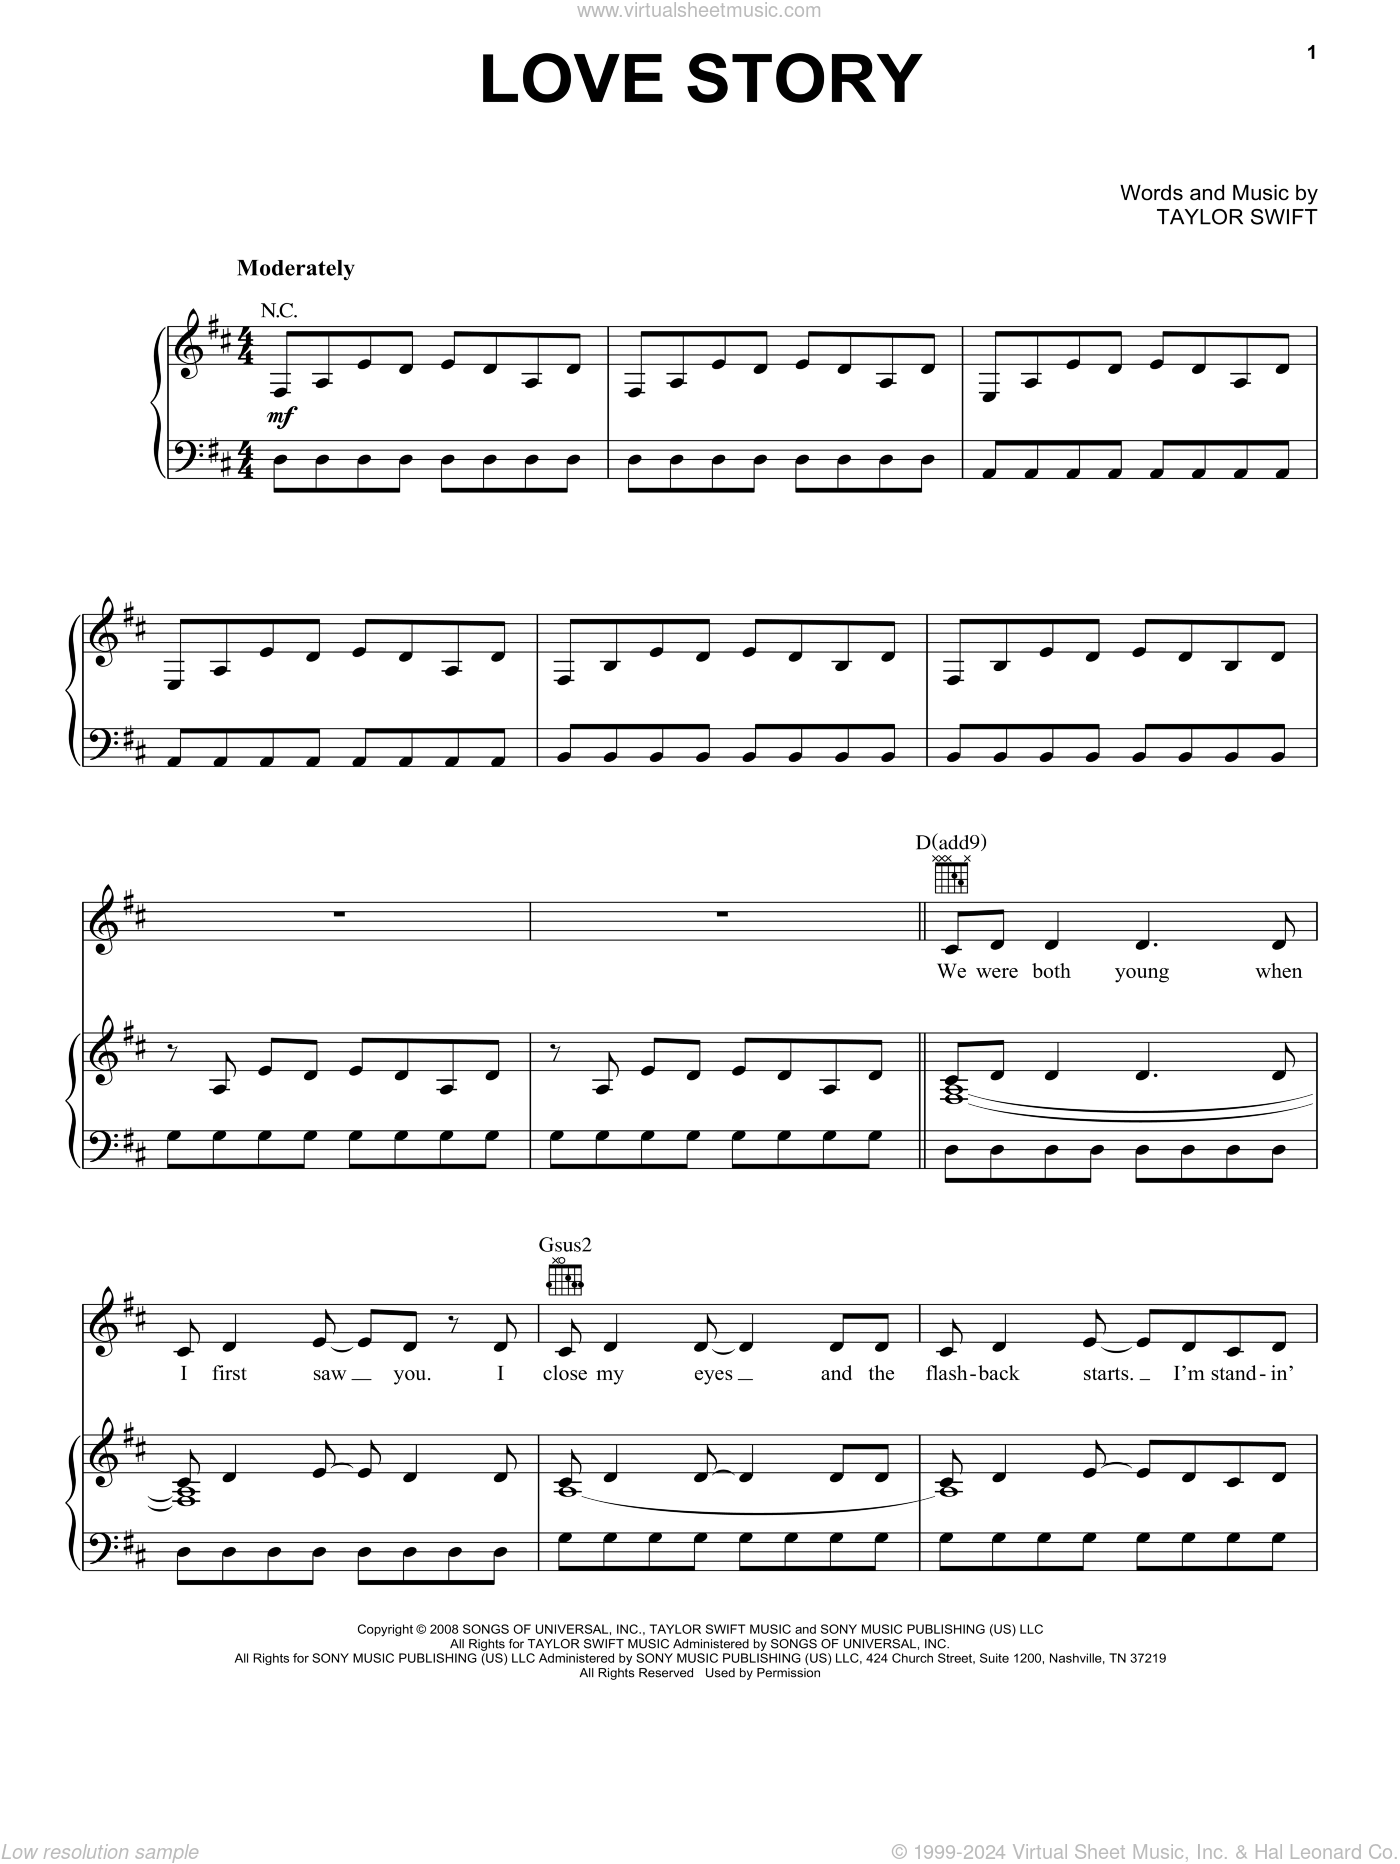 Swift - Love Story sheet music for voice, piano or guitar (PDF) .